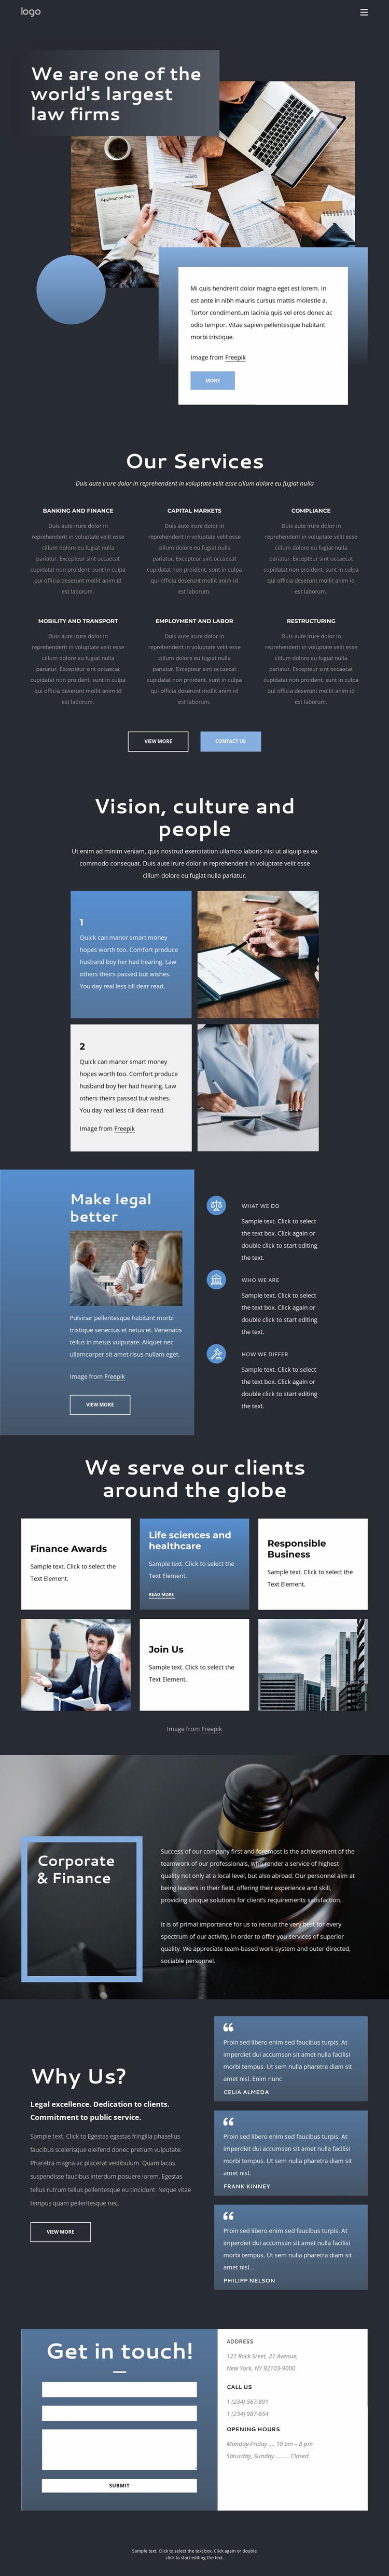 We are an elite law firm Website Template